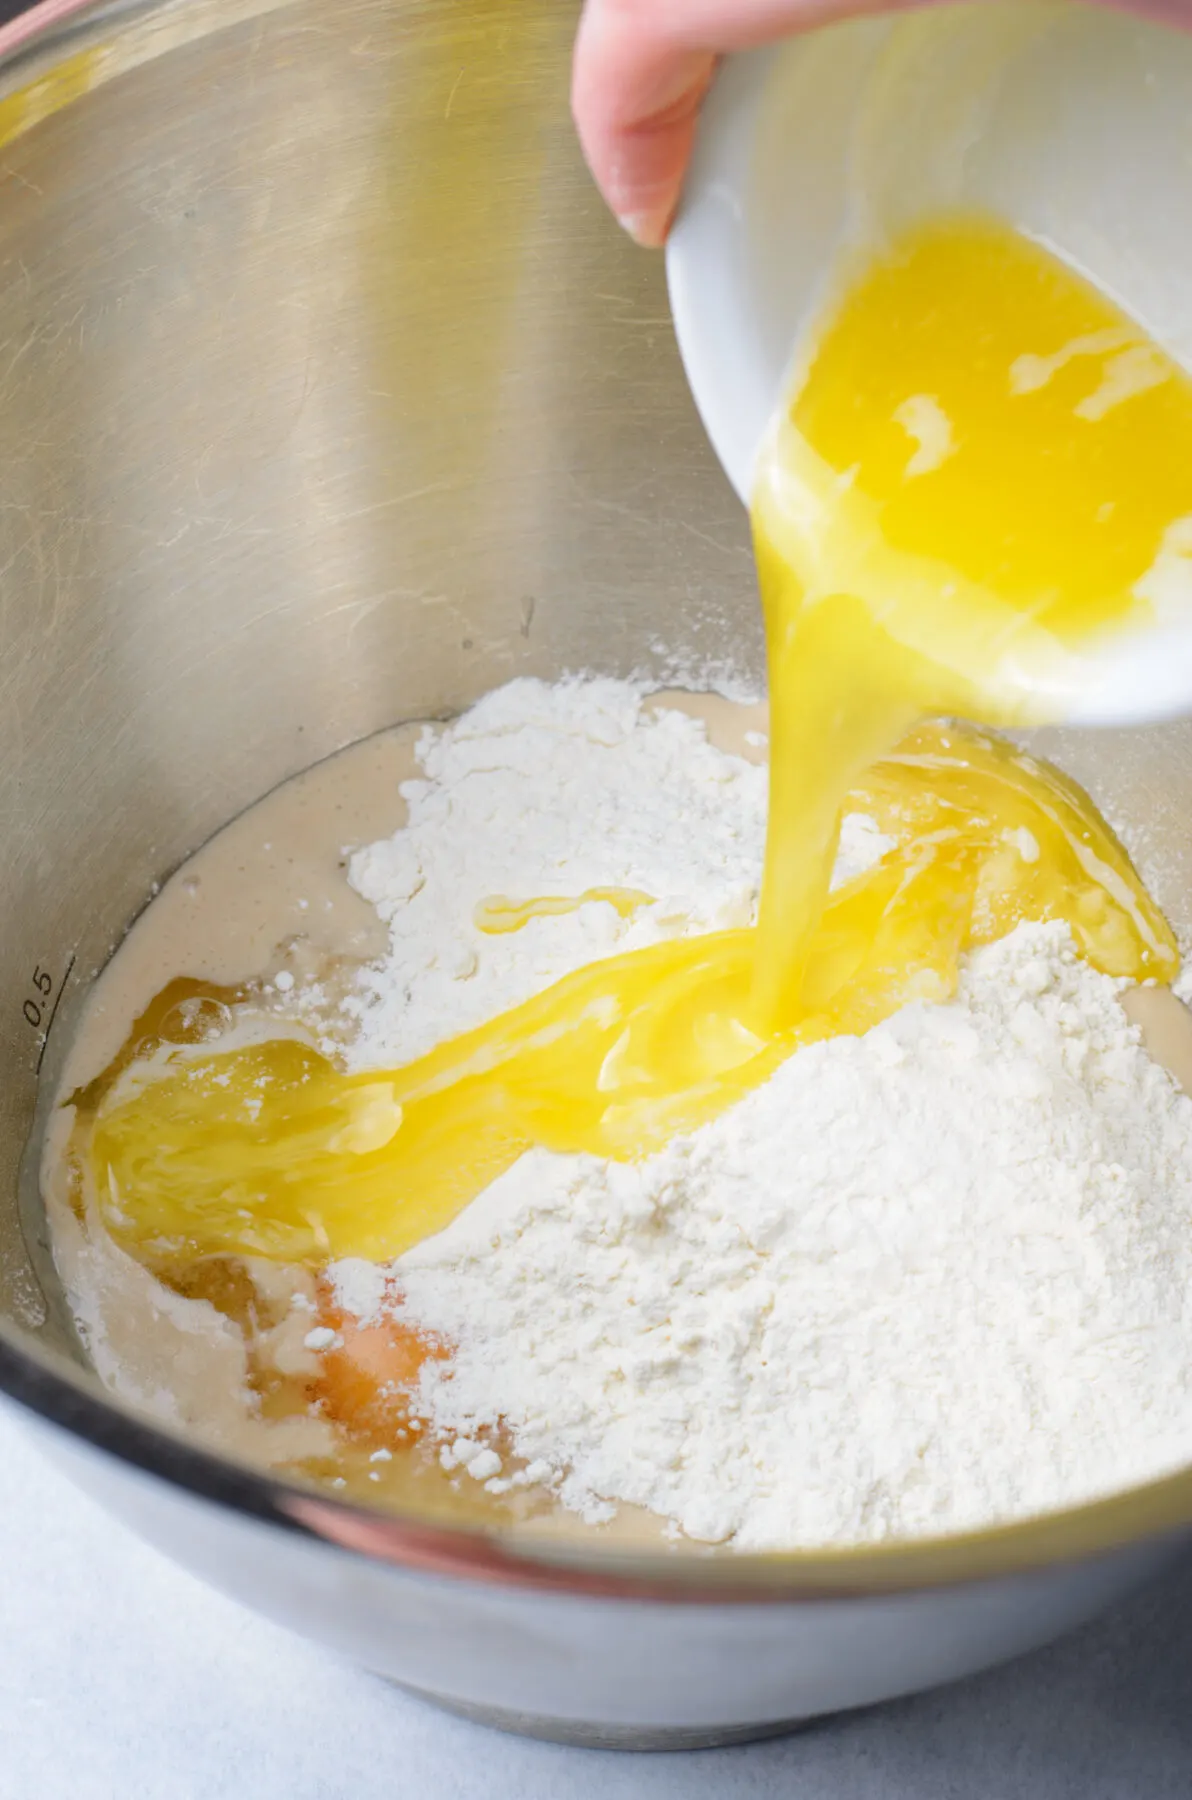 Flour and egg added to yeast mixture.